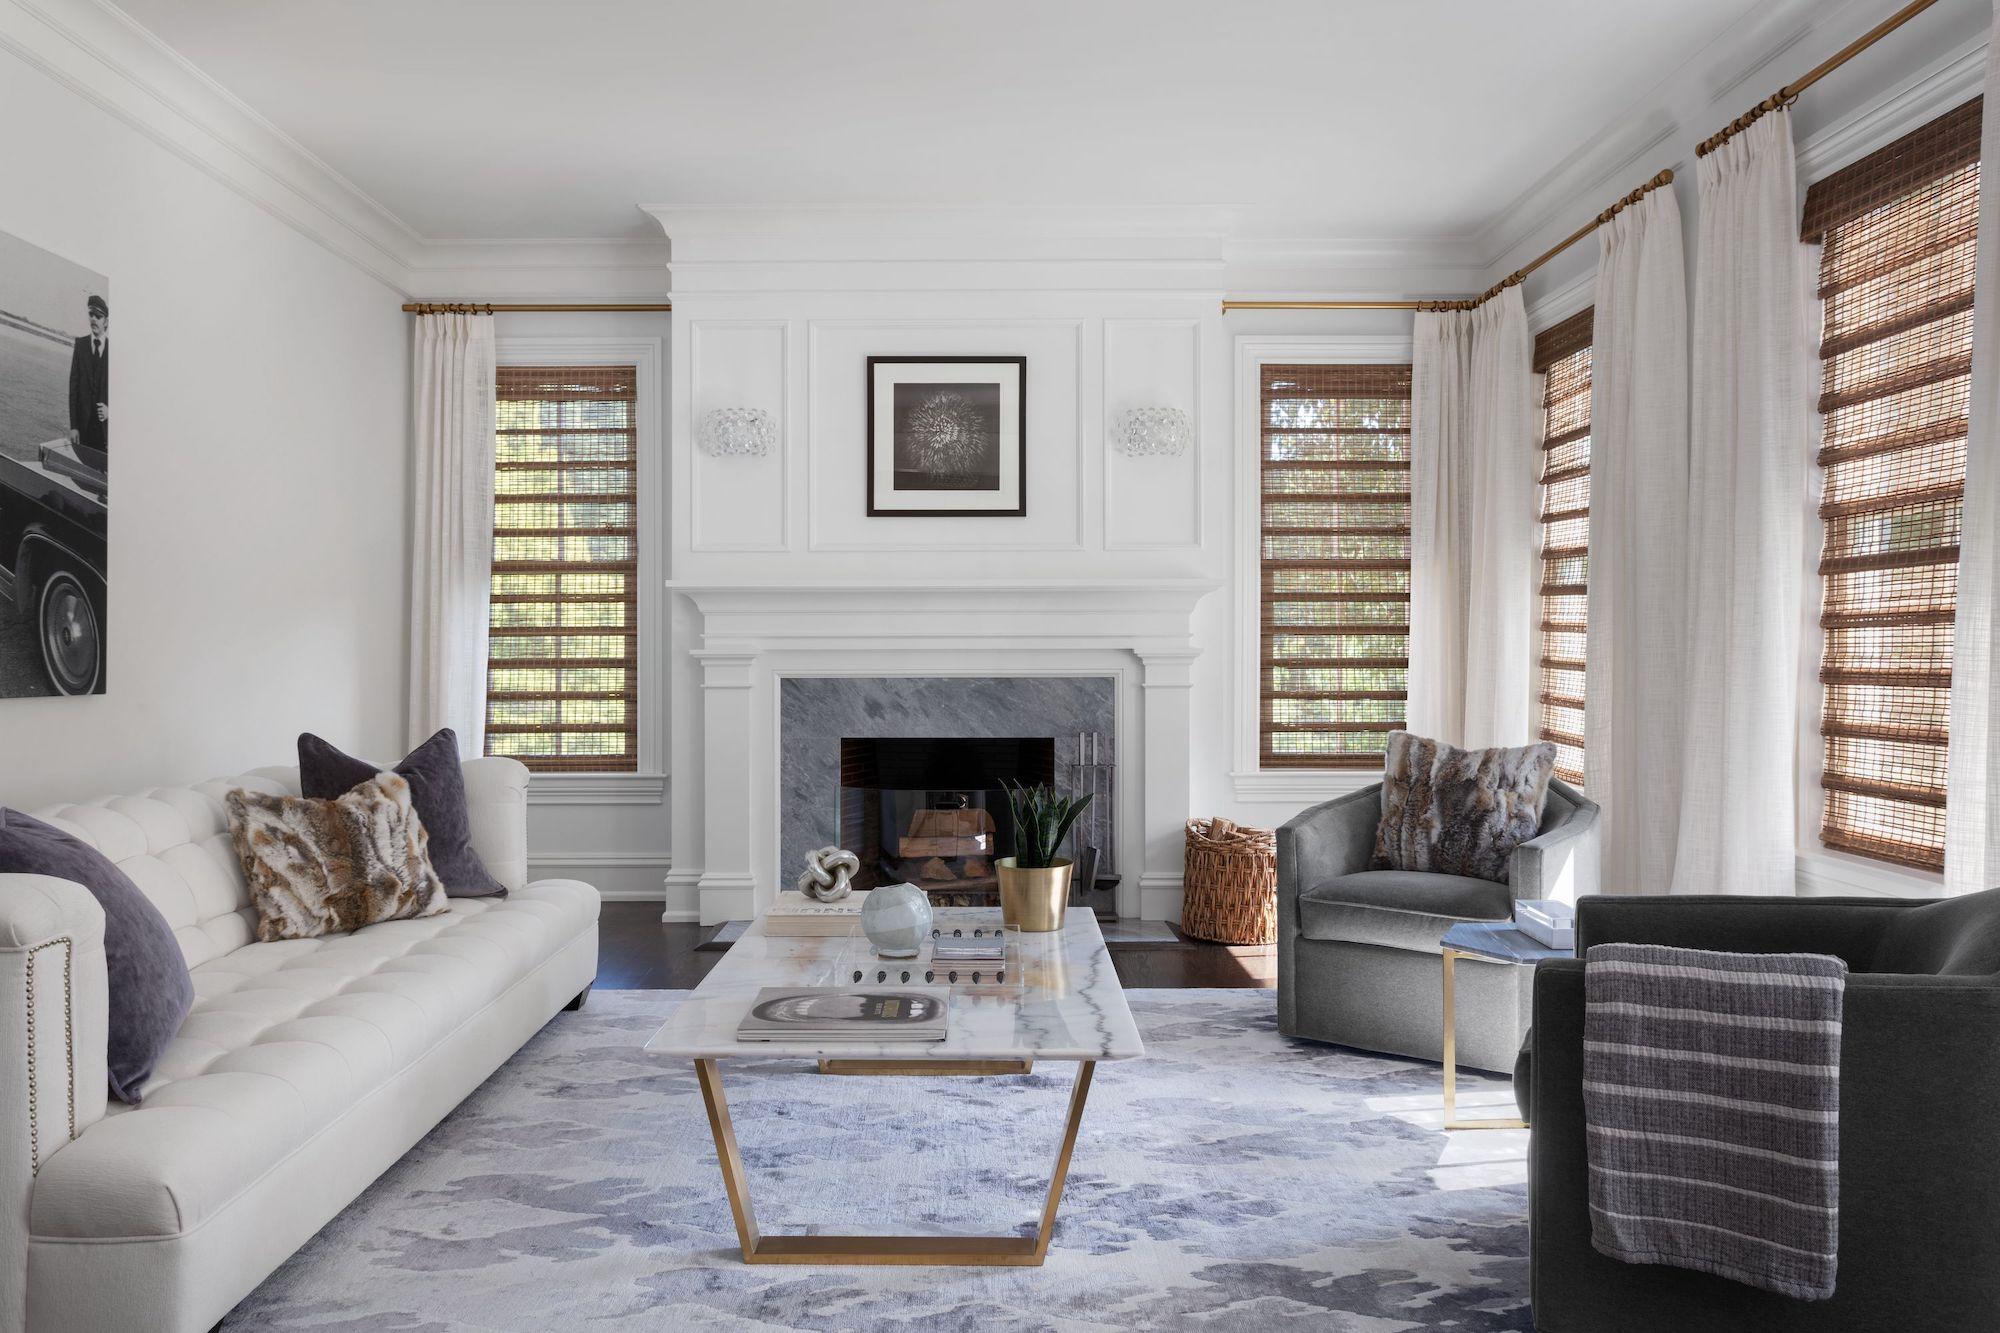 A contemporary living room features white linen drapery and unlined woven wood shades in a beautiful natural wood tone